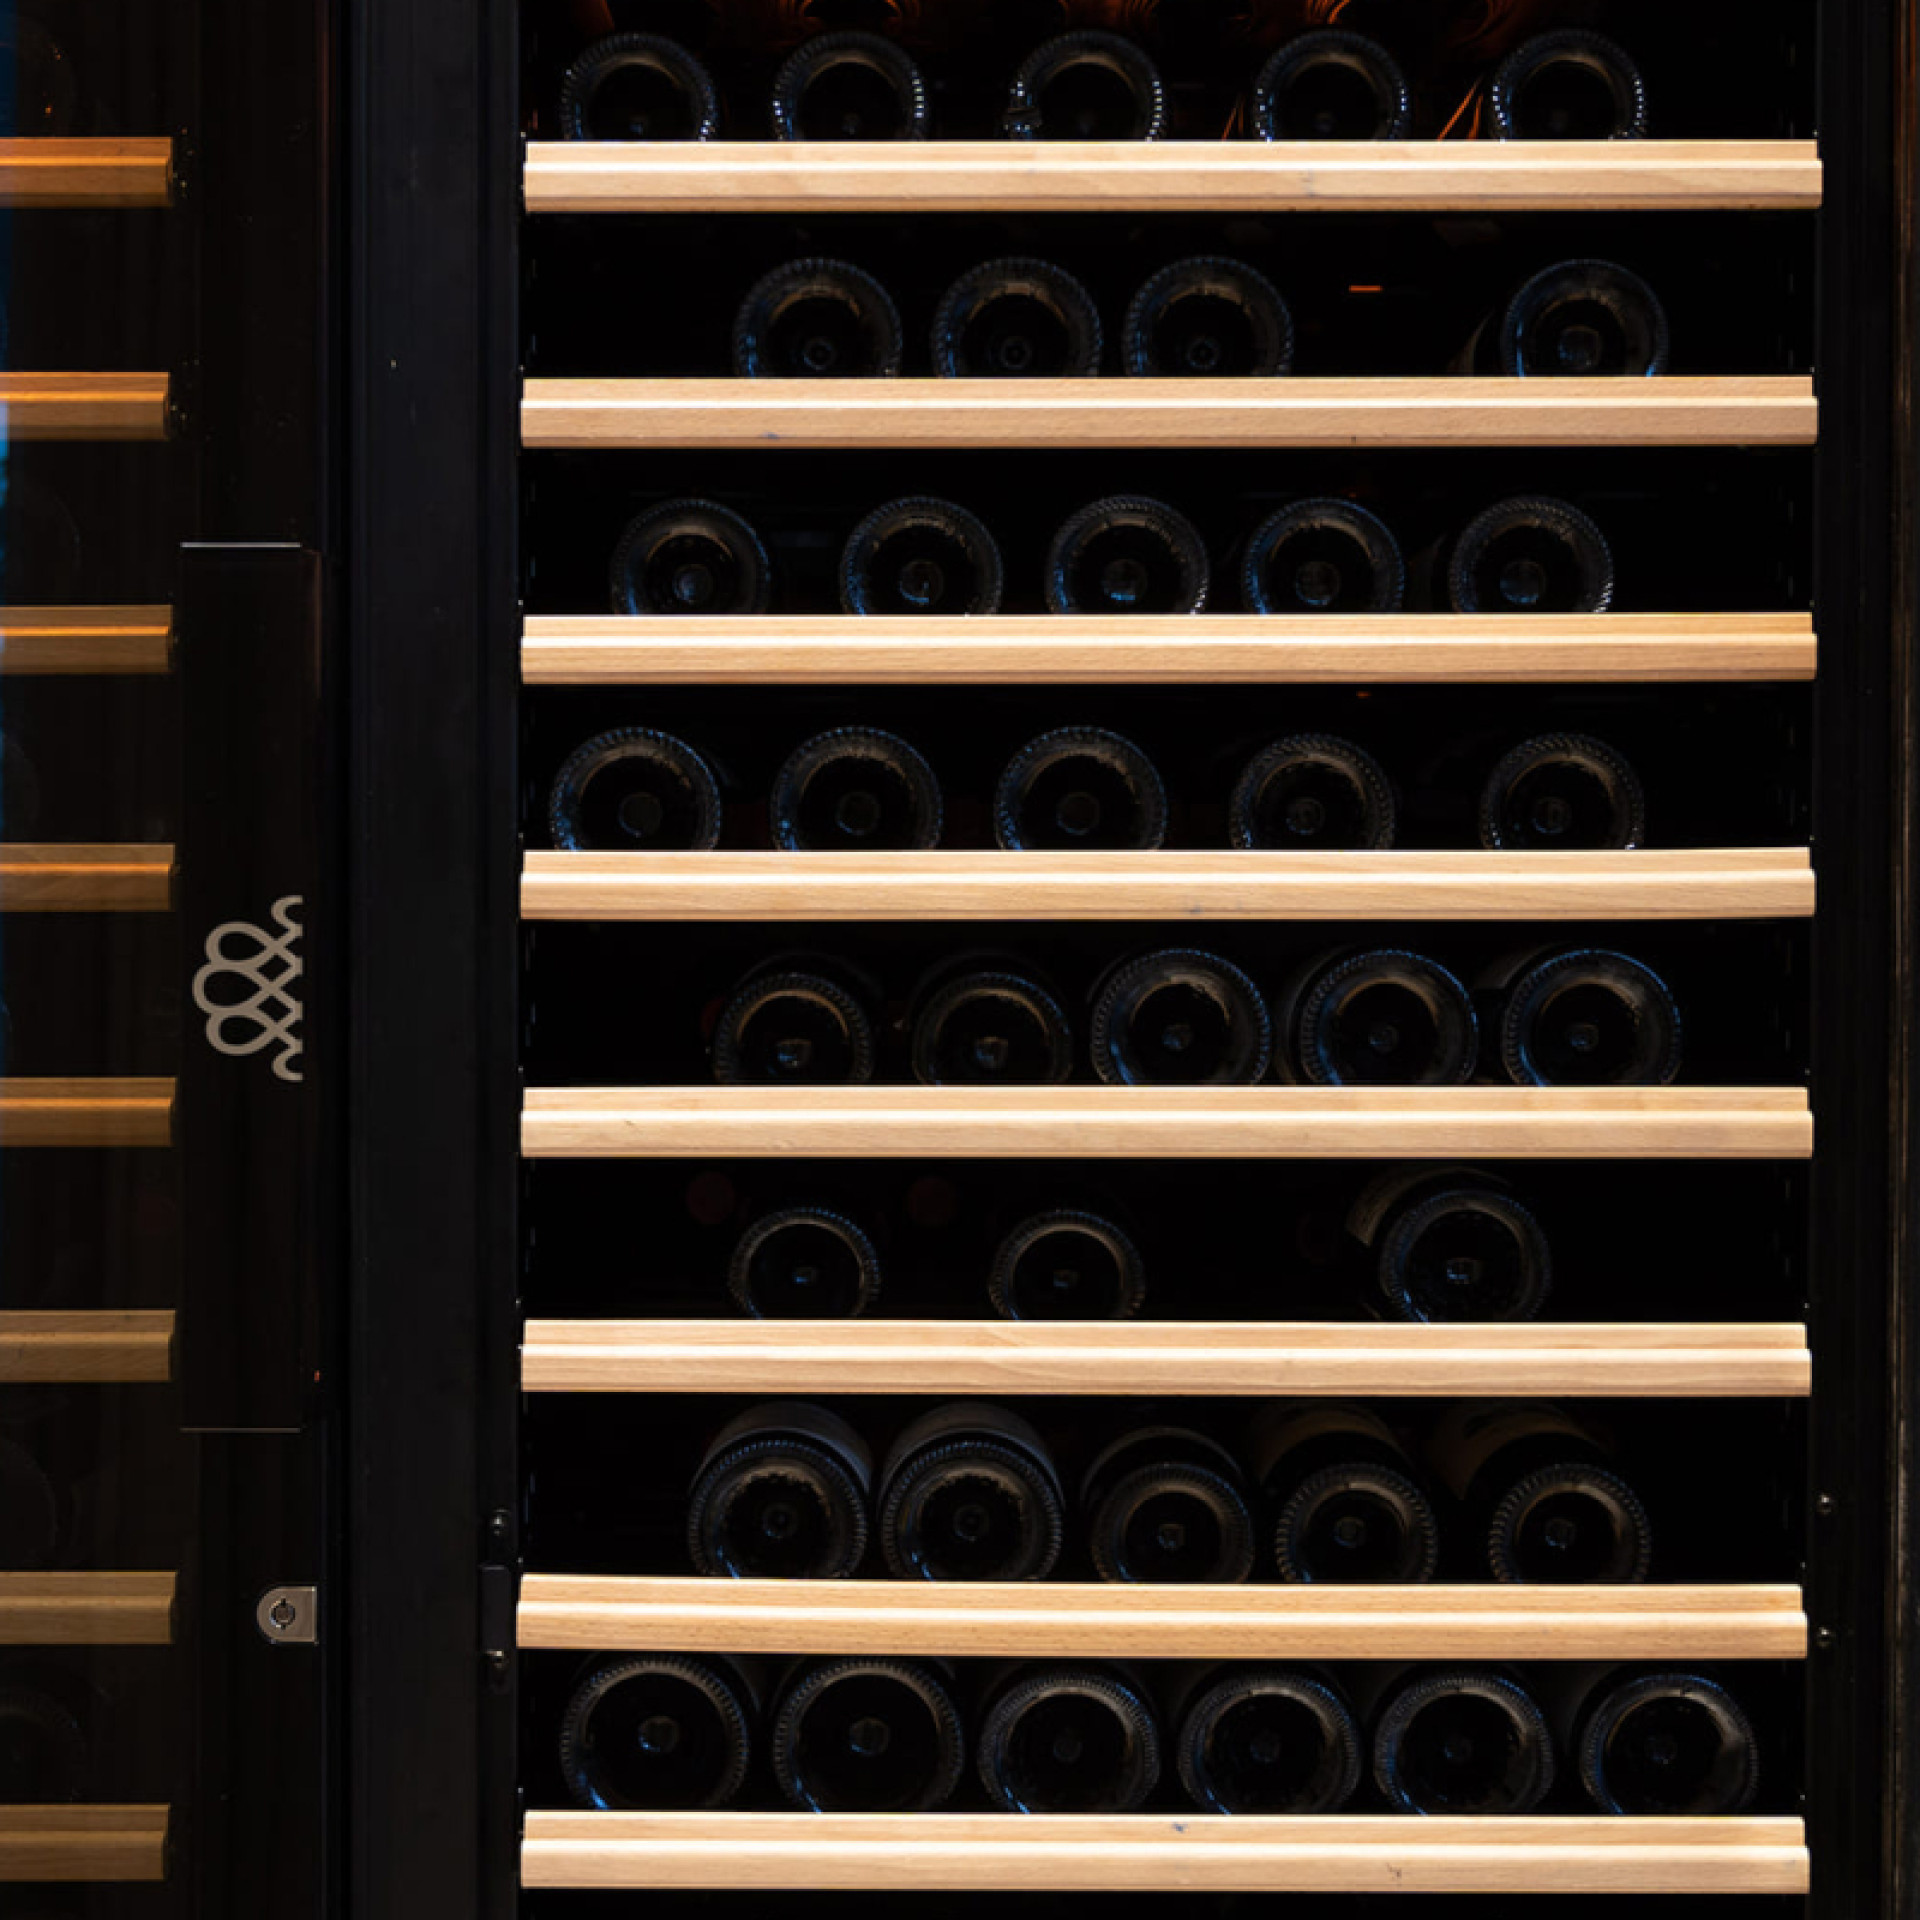 Professional aging wine cabinet and natural cellar storage. Large storage capacity. Long-term bottle storage cabinet meeting all criteria: stable temperature, humidity level, vibrations, etc.